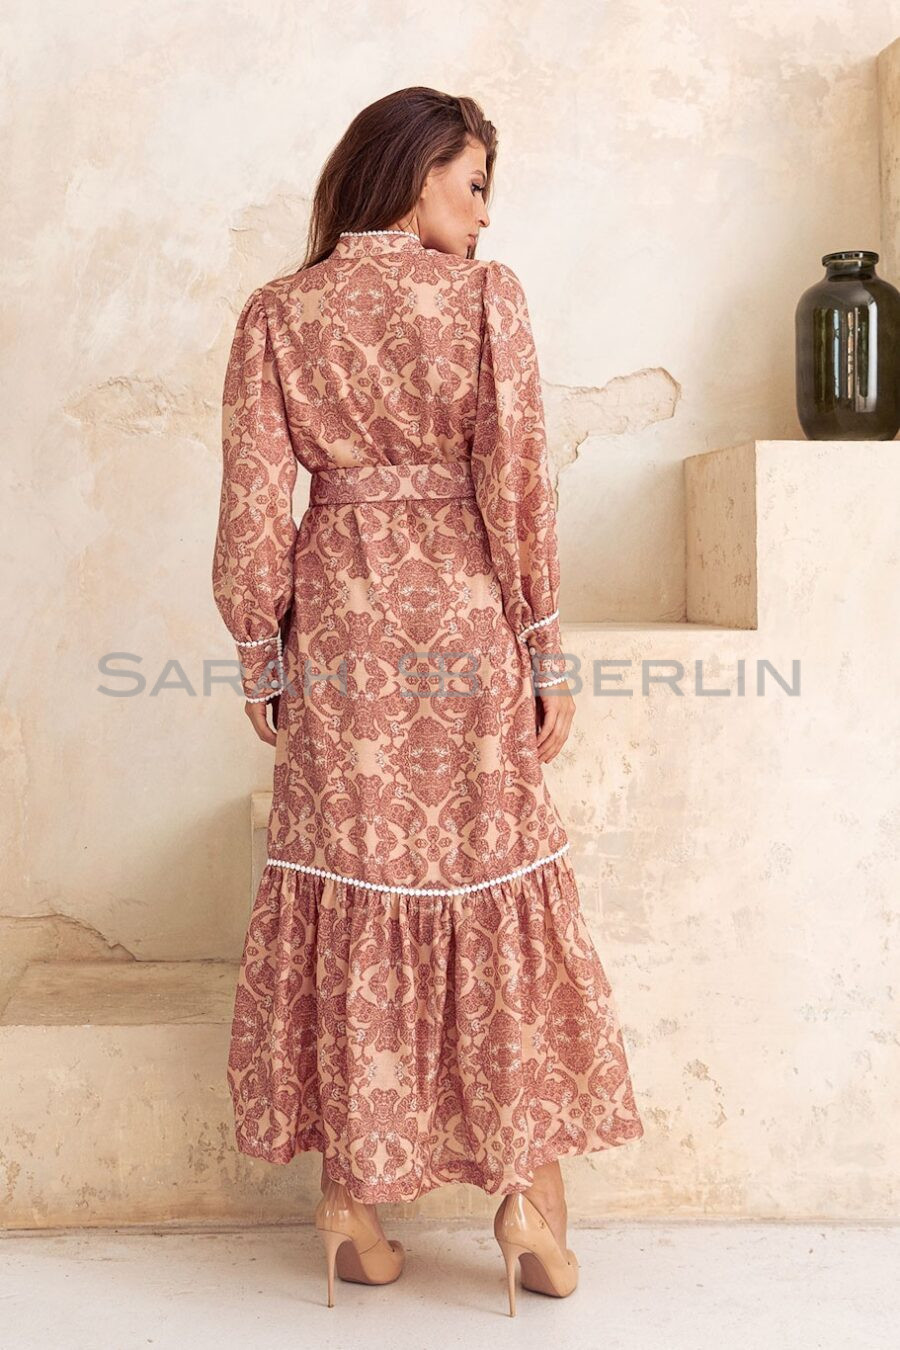 Loose dress with lace, made of Italian dress wool